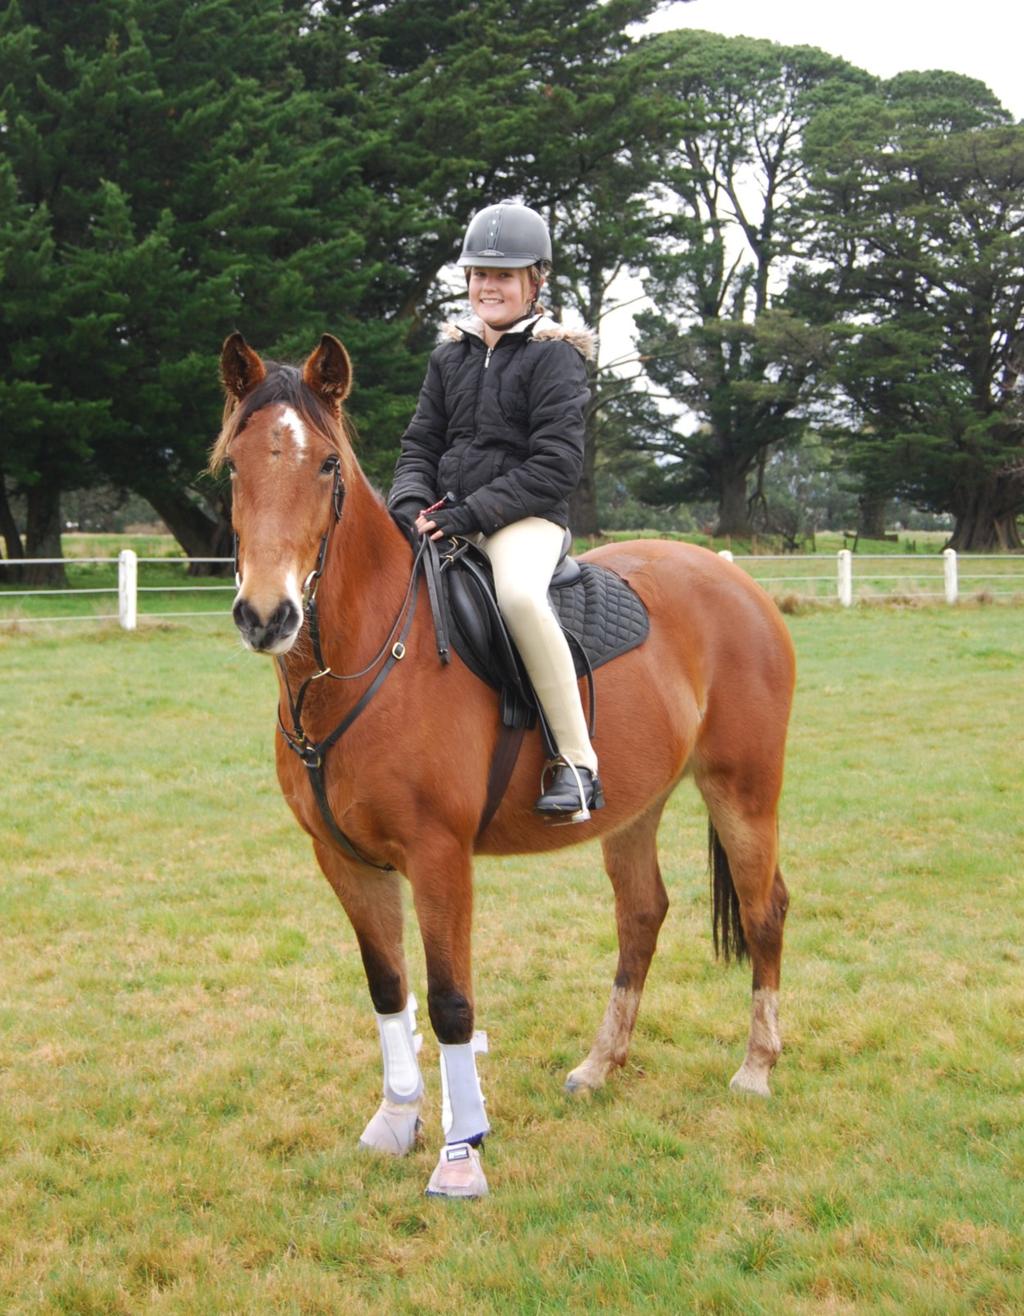 Welcome new member, Teagan and her fantastic mount Chelsea. Teagan took part in a come and try rally last year and joined over the holidays. We hope you enjoy riding with club.